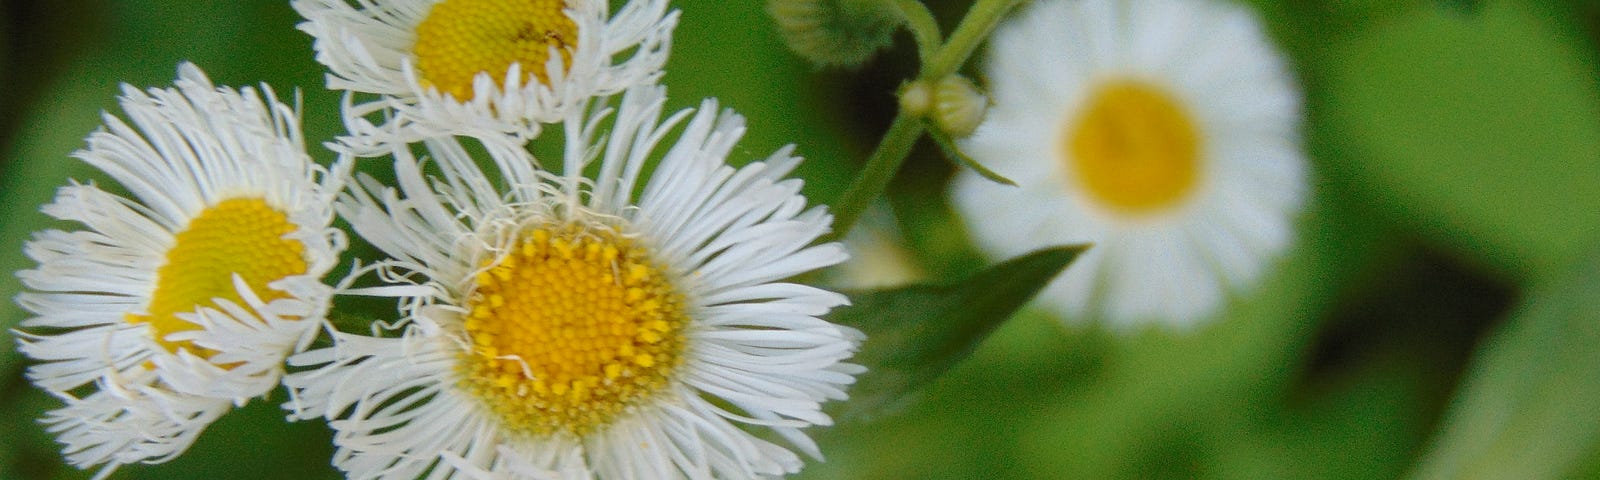 A photograph of fleabane, which is a small white flower with a yellow center.